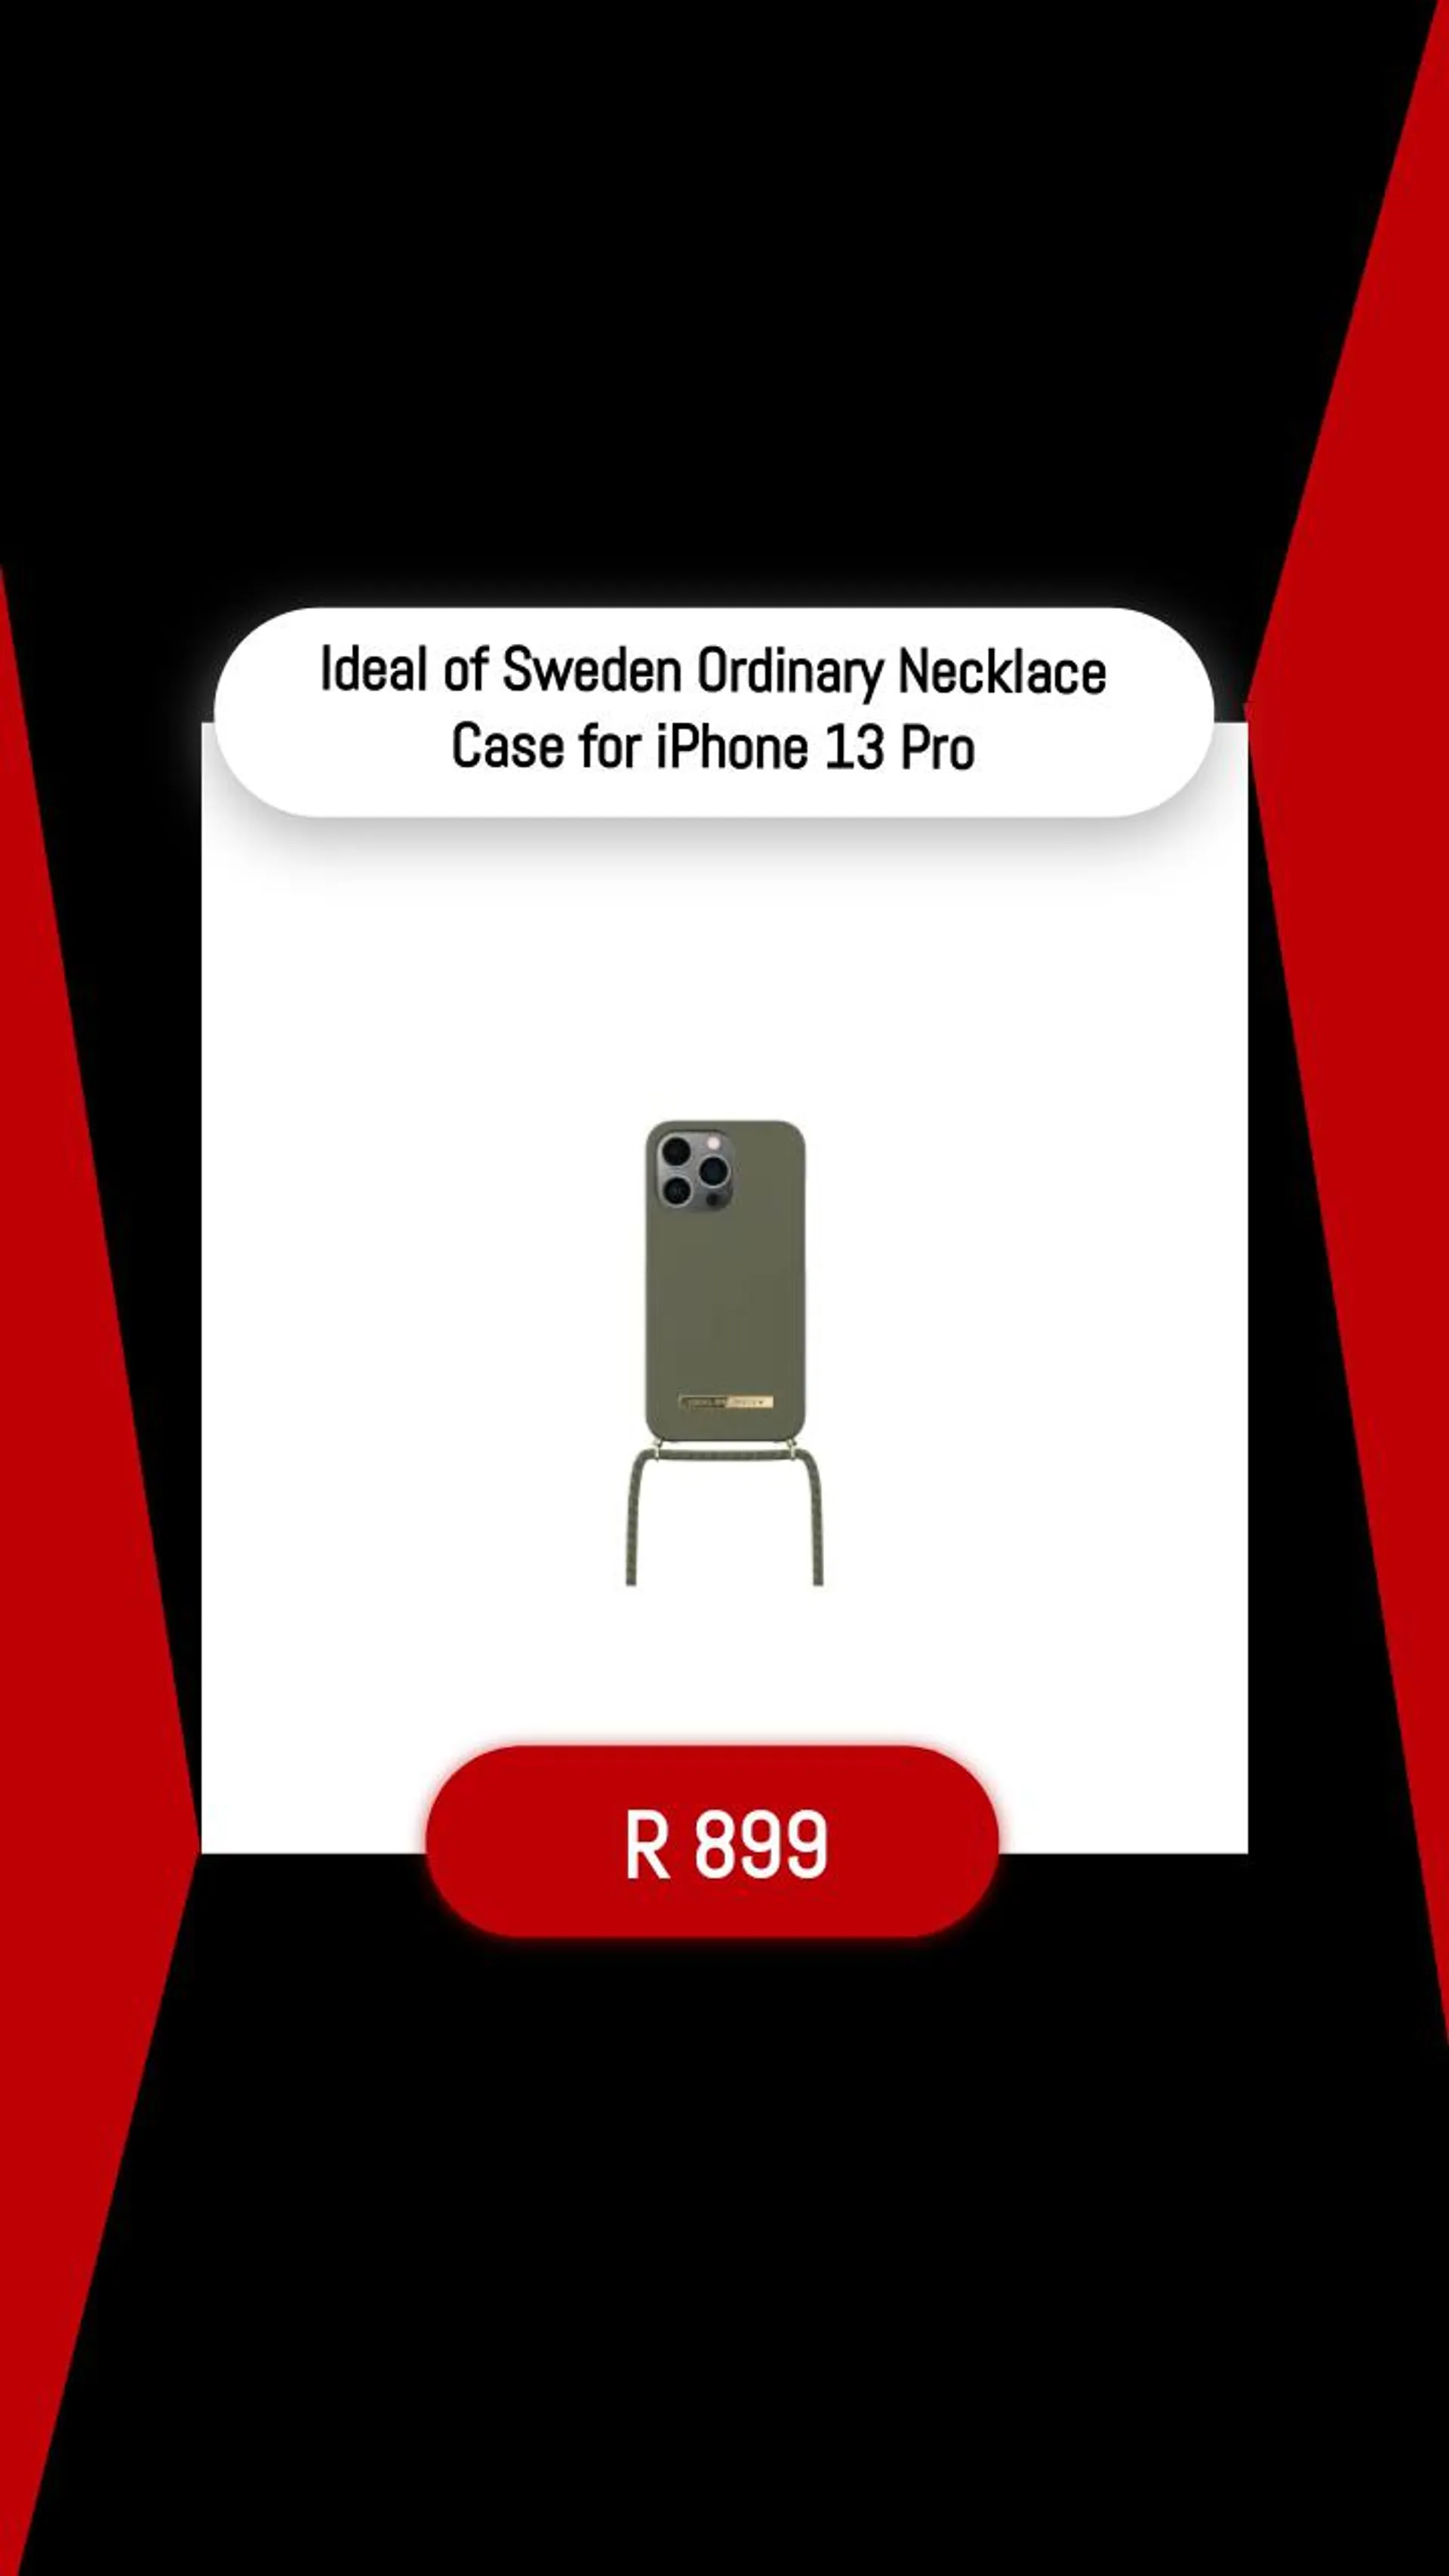 Ideal of Sweden Ordinary Necklace Case for iPhone 13 Pro